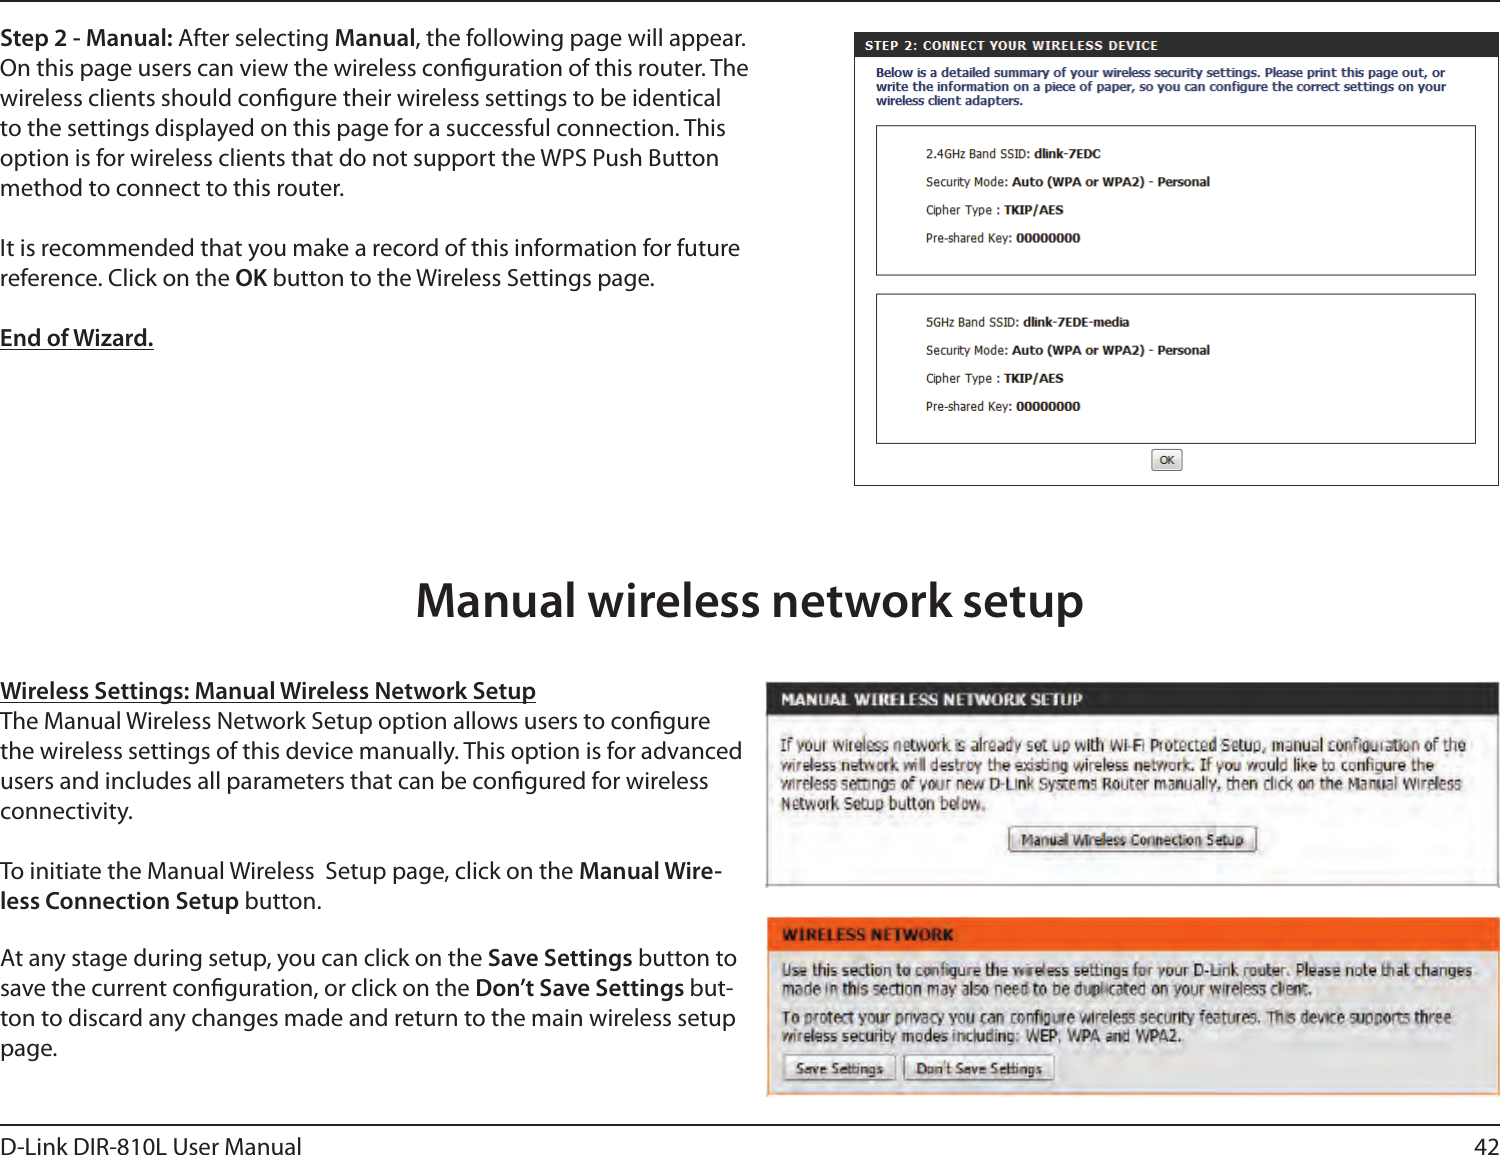 42D-Link DIR-810L User ManualStep 2 - Manual: After selecting Manual, the following page will appear. On this page users can view the wireless conguration of this router. The wireless clients should congure their wireless settings to be identical to the settings displayed on this page for a successful connection. This option is for wireless clients that do not support the WPS Push Button method to connect to this router.It is recommended that you make a record of this information for future reference. Click on the OK button to the Wireless Settings page.End of Wizard.Wireless Settings: Manual Wireless Network SetupThe Manual Wireless Network Setup option allows users to congure the wireless settings of this device manually. This option is for advanced users and includes all parameters that can be congured for wireless connectivity.To initiate the Manual Wireless  Setup page, click on the Manual Wire-less Connection Setup button.At any stage during setup, you can click on the Save Settings button to save the current conguration, or click on the Don’t Save Settings but-ton to discard any changes made and return to the main wireless setup page.Manual wireless network setup